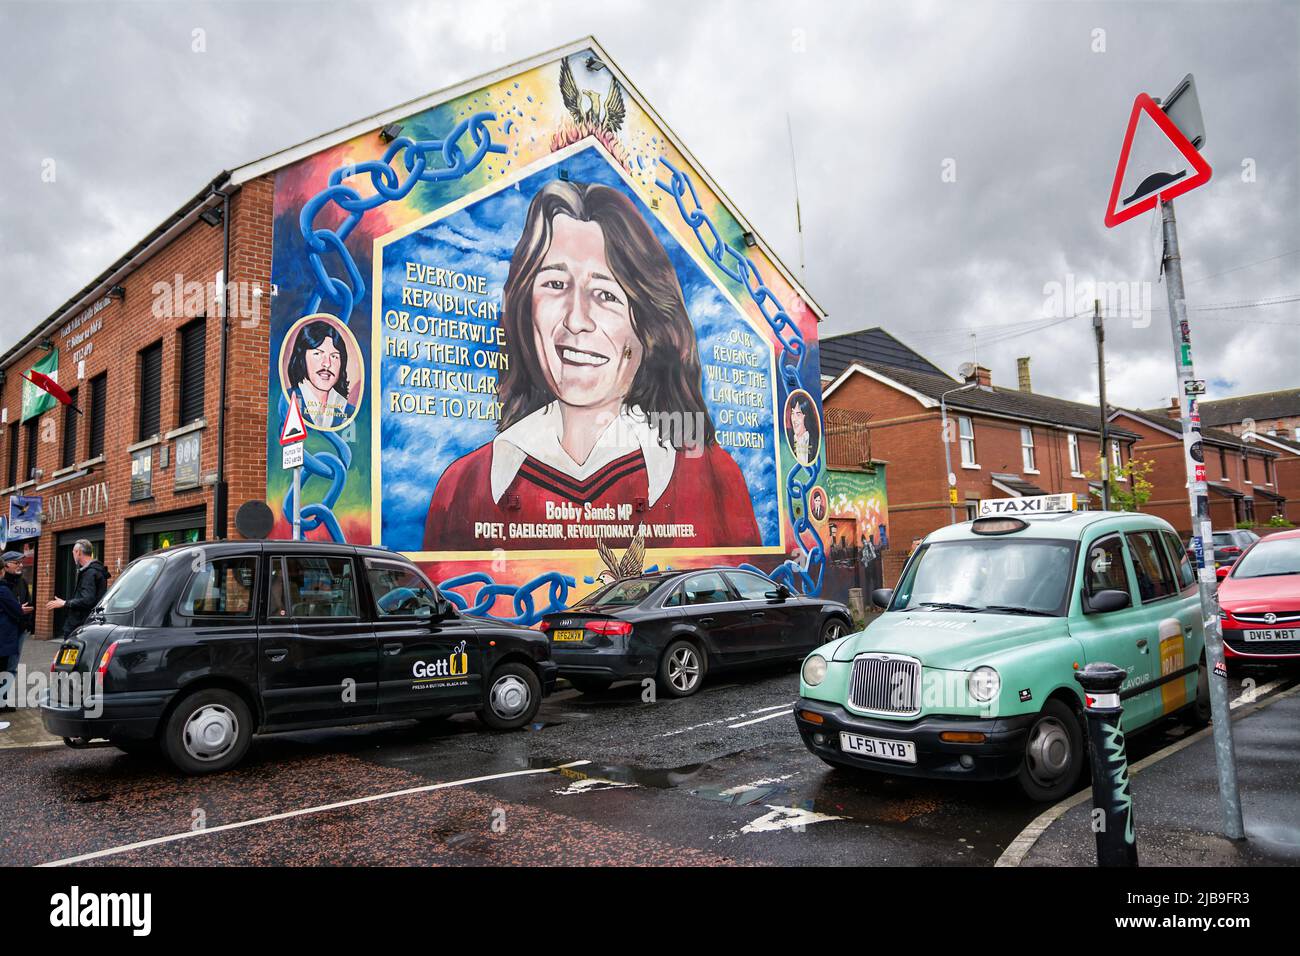 Belfast, United Kindom - 20 May 2022: Mural depicting by the poet and revolutionary Bobby Sands on the wall of a house in the Shankhill neighborhood i Stock Photo